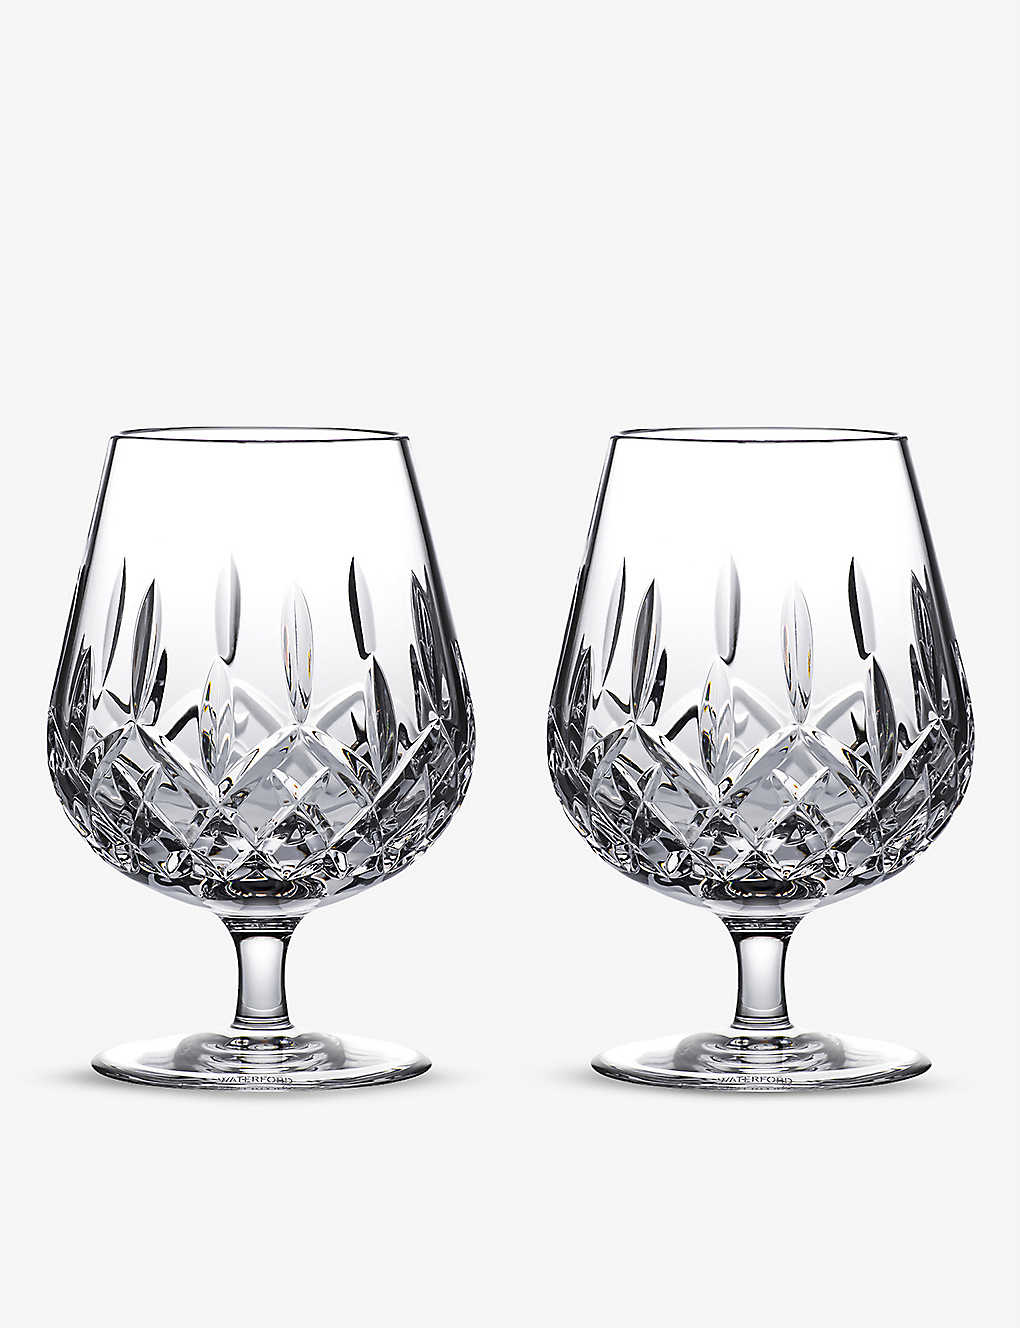 Shop Waterford Lismore Brancy Crystal Glasses Set Of Two